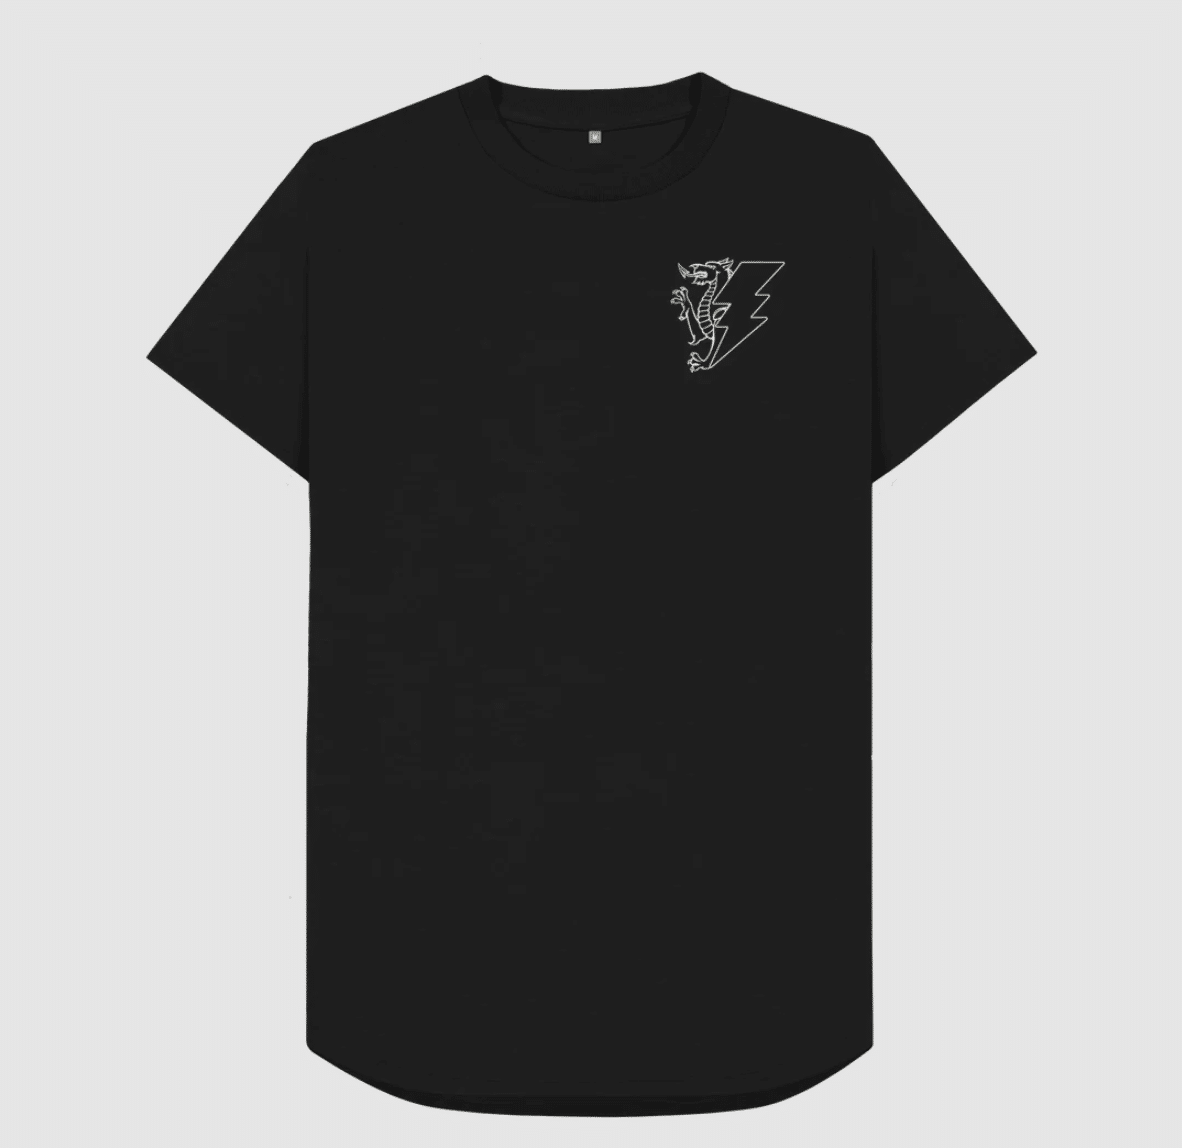 A black t-shirt, perfect for bouldering in Swansea.